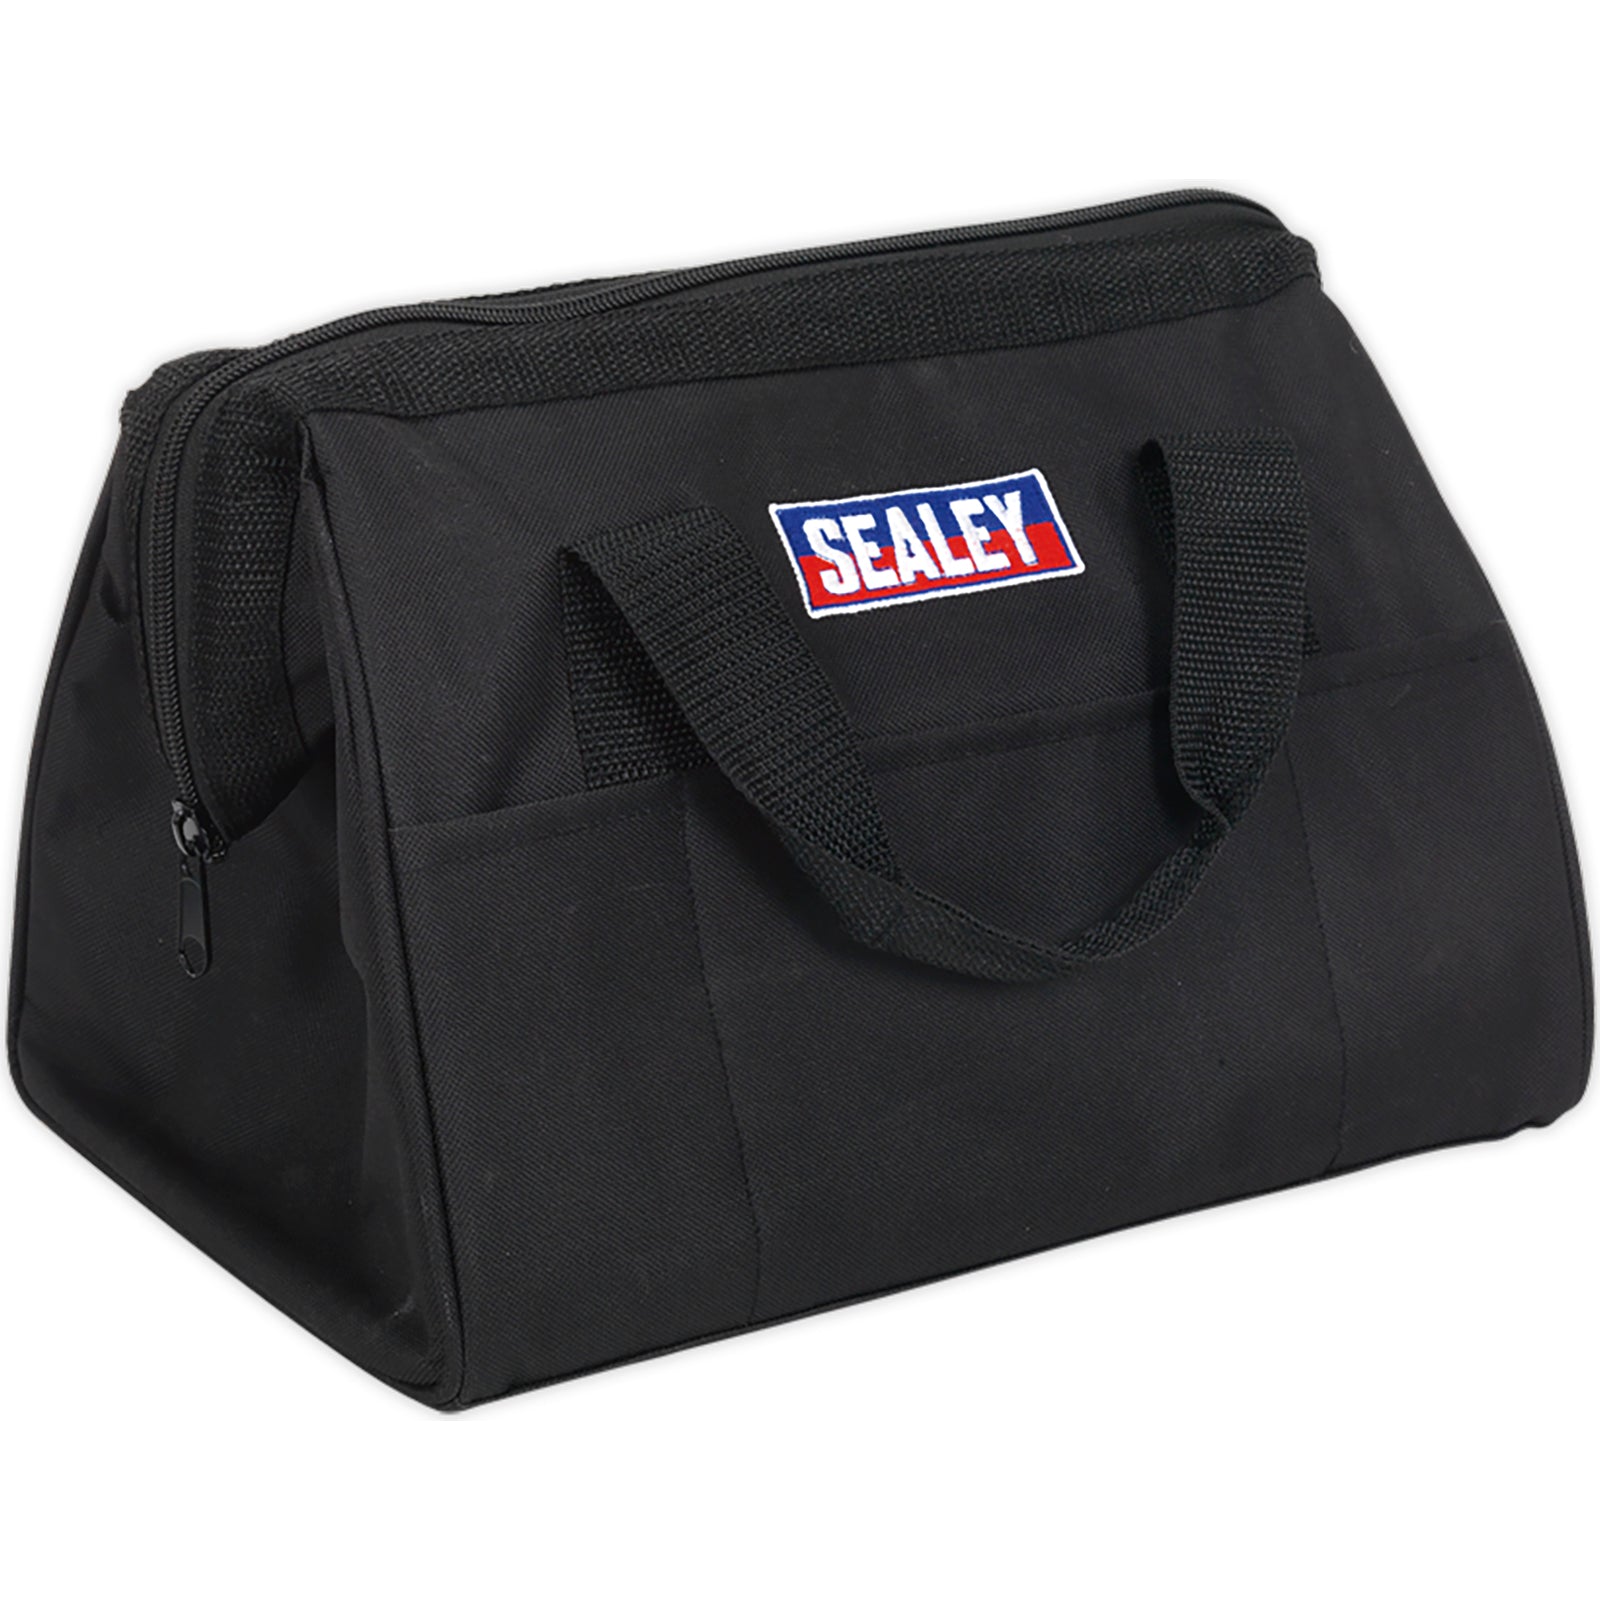 Sealey Canvas Bag For CP1200 and CP6000 Series Power Tools